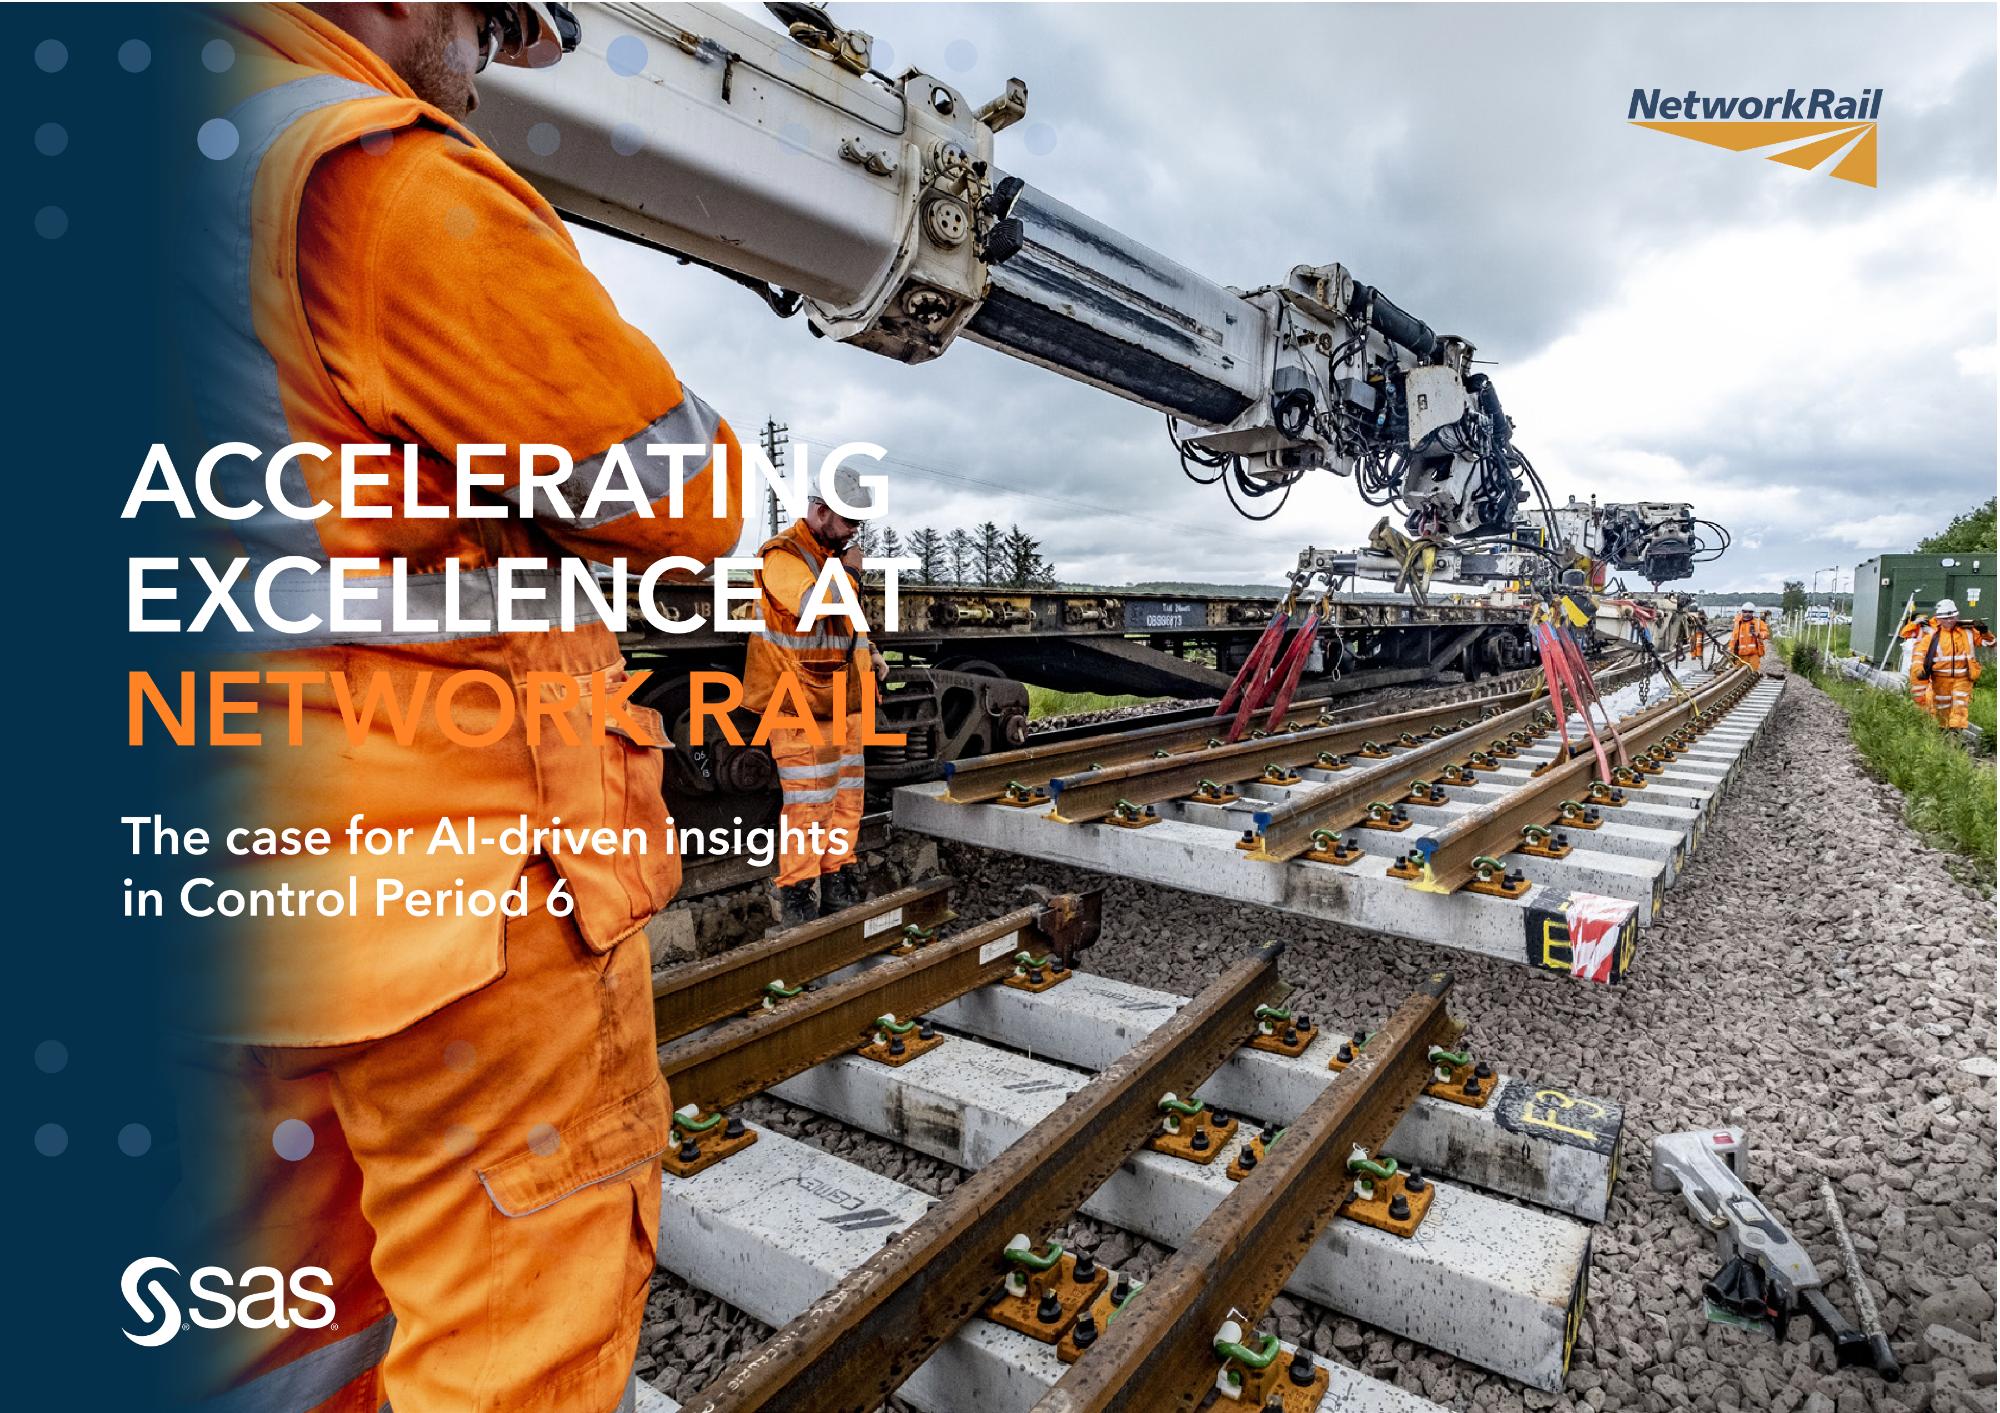 Accelerating excellence at network rail, The case for AI-driven insights in Control Period 6 